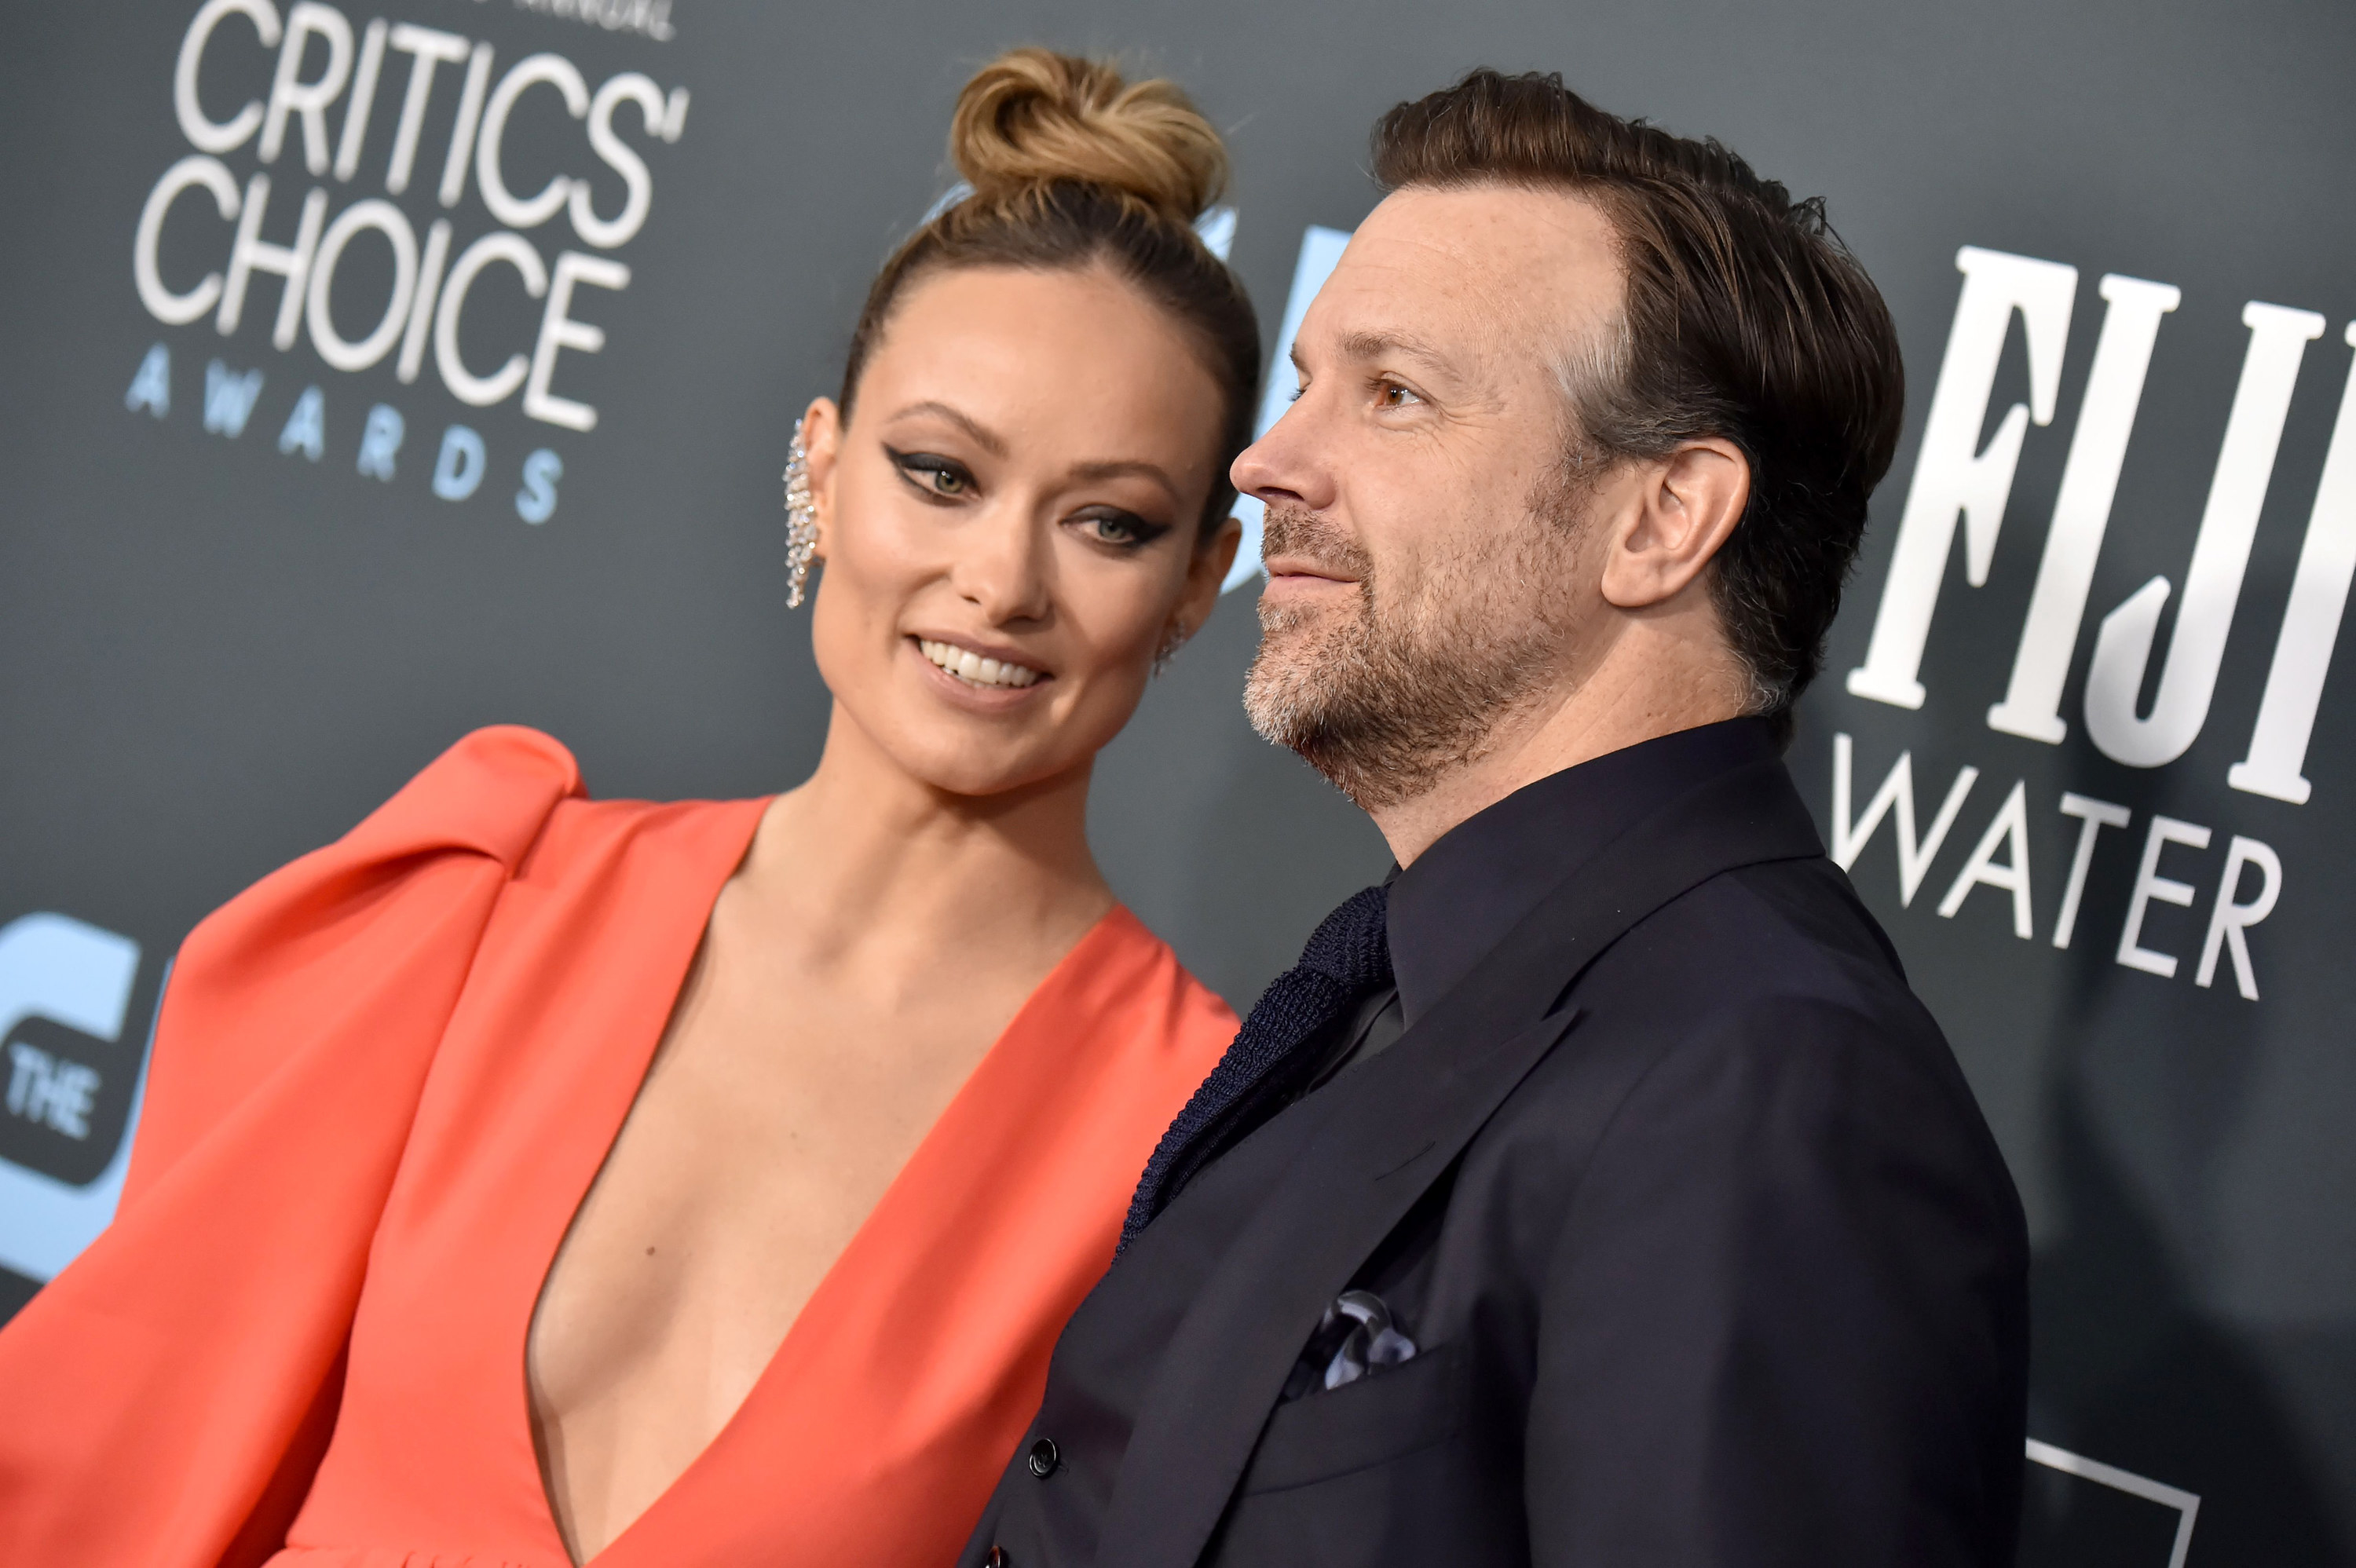 Olivia Wilde and Jason Sudeikis at an event